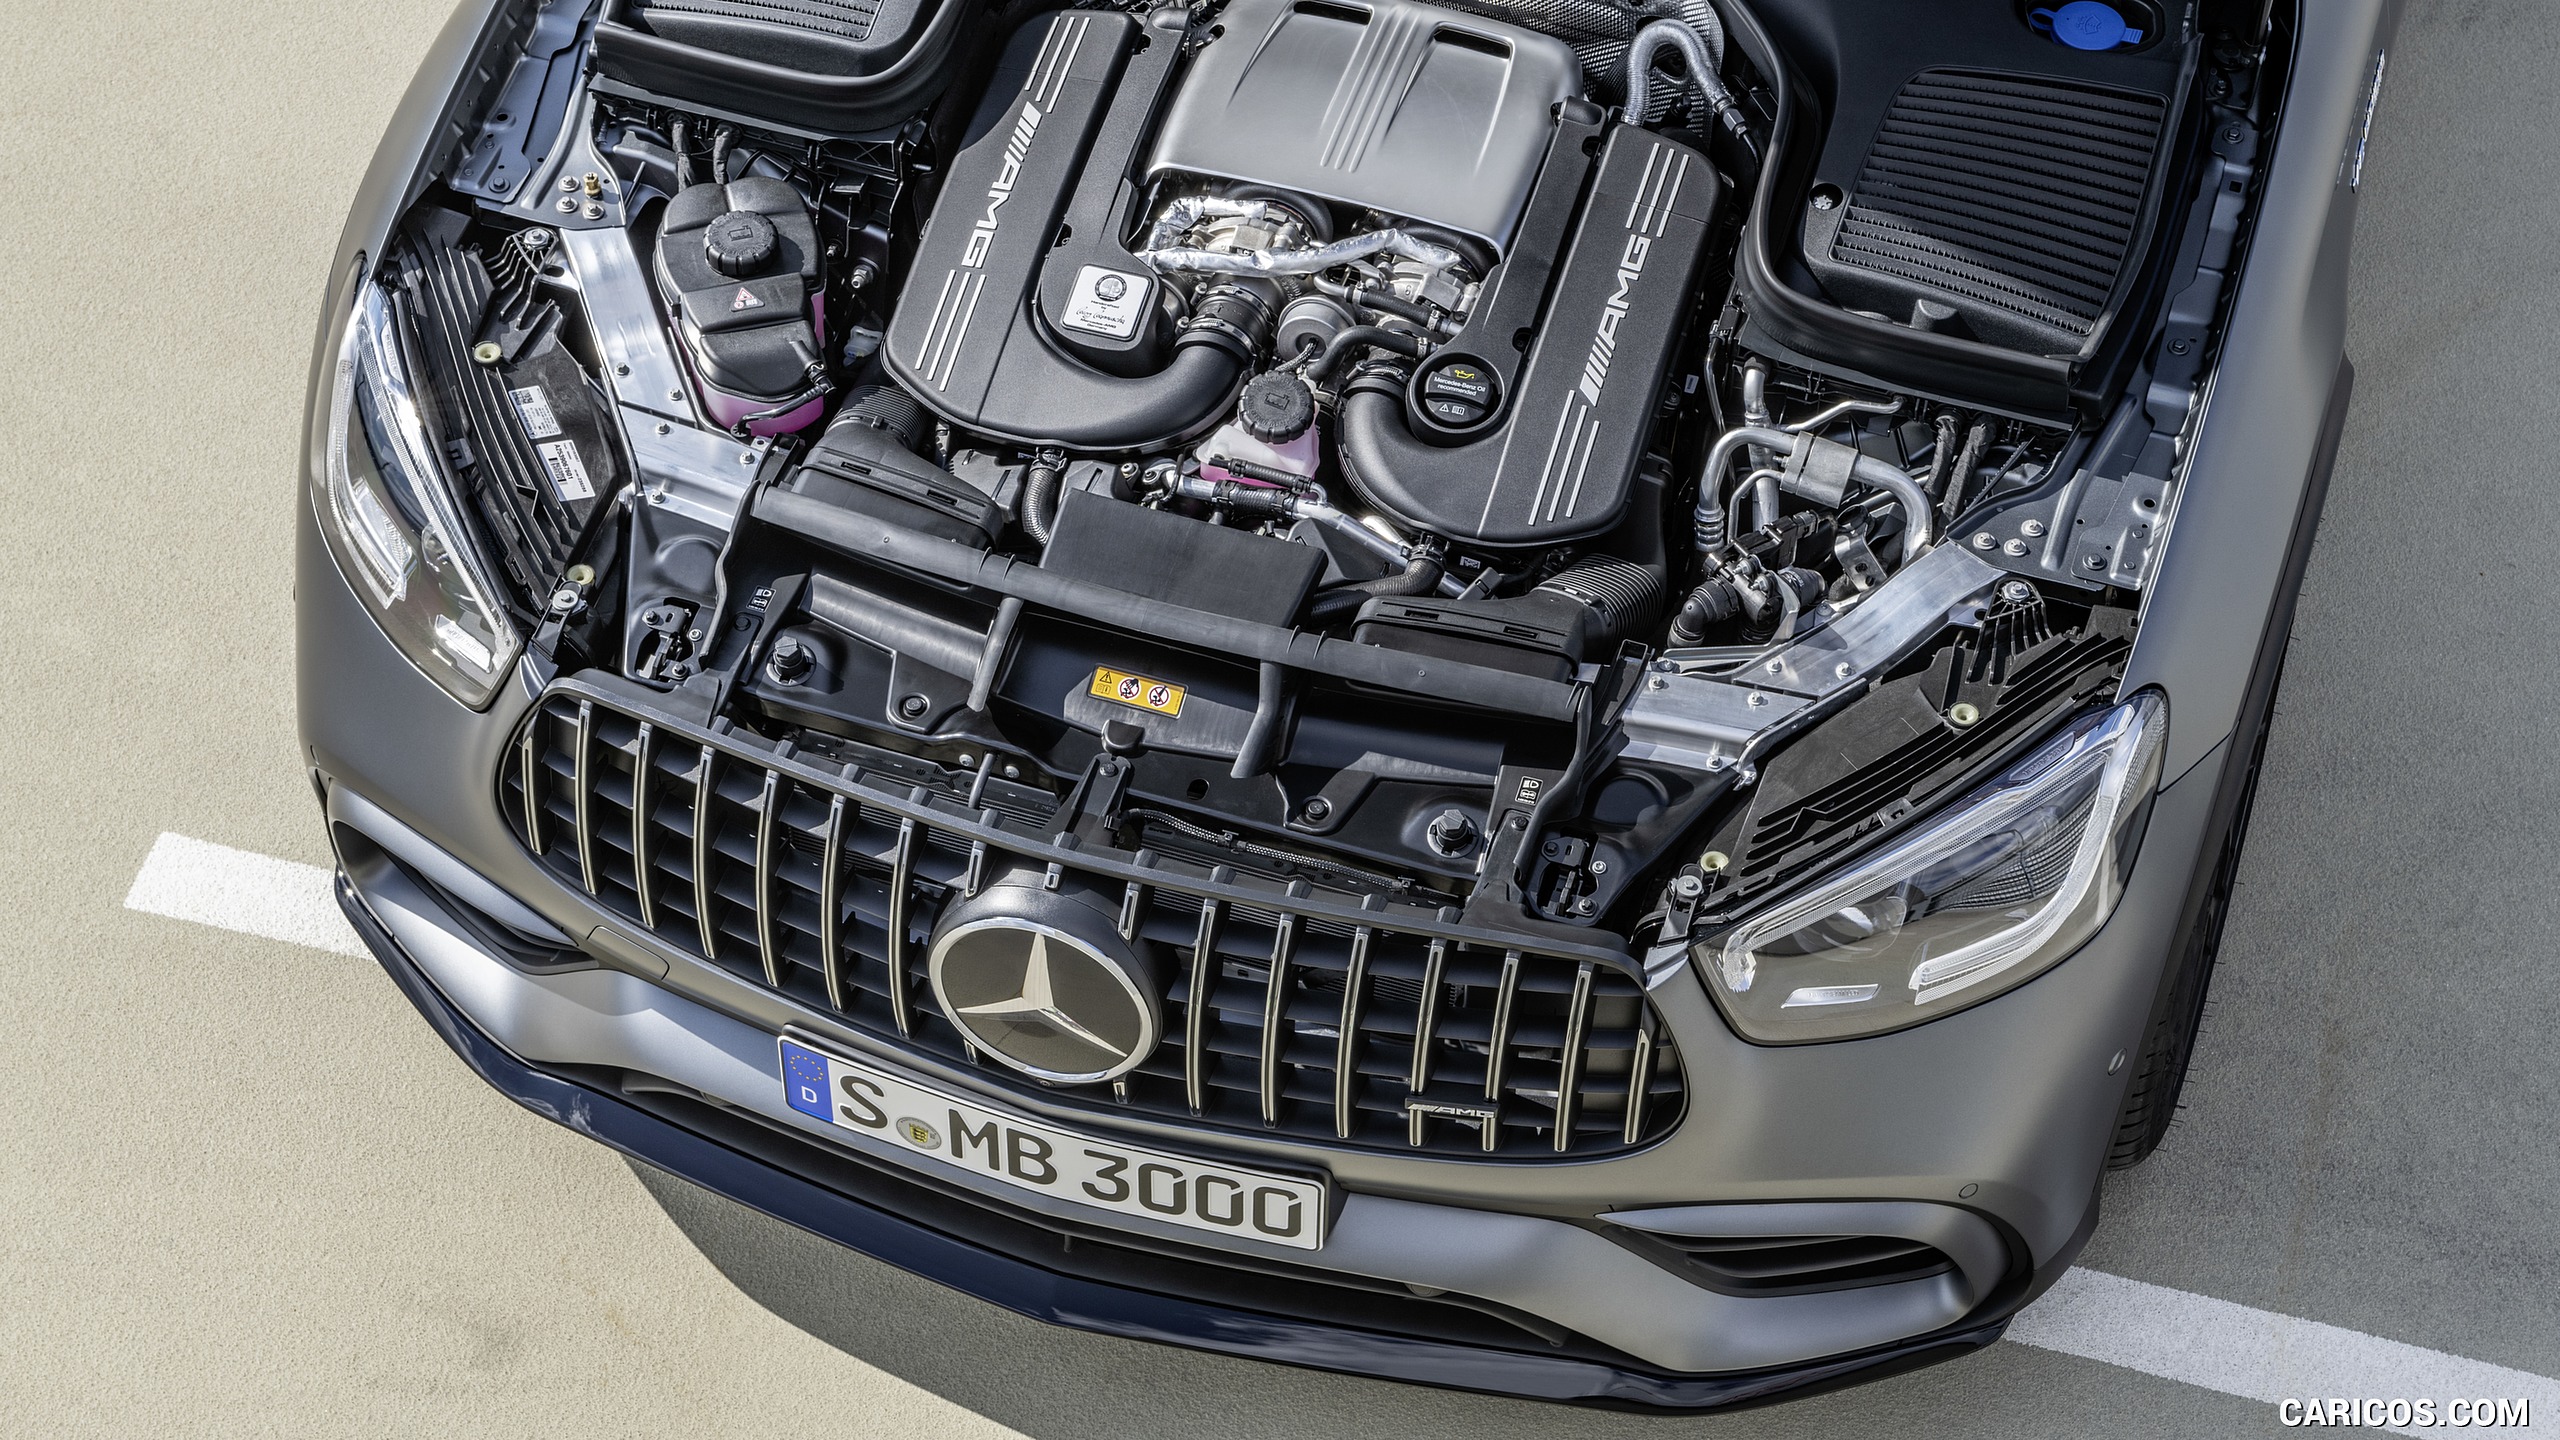 2020 Mercedes-AMG GLC 63 S 4MATIC+ Coupe - Engine, #18 of 102